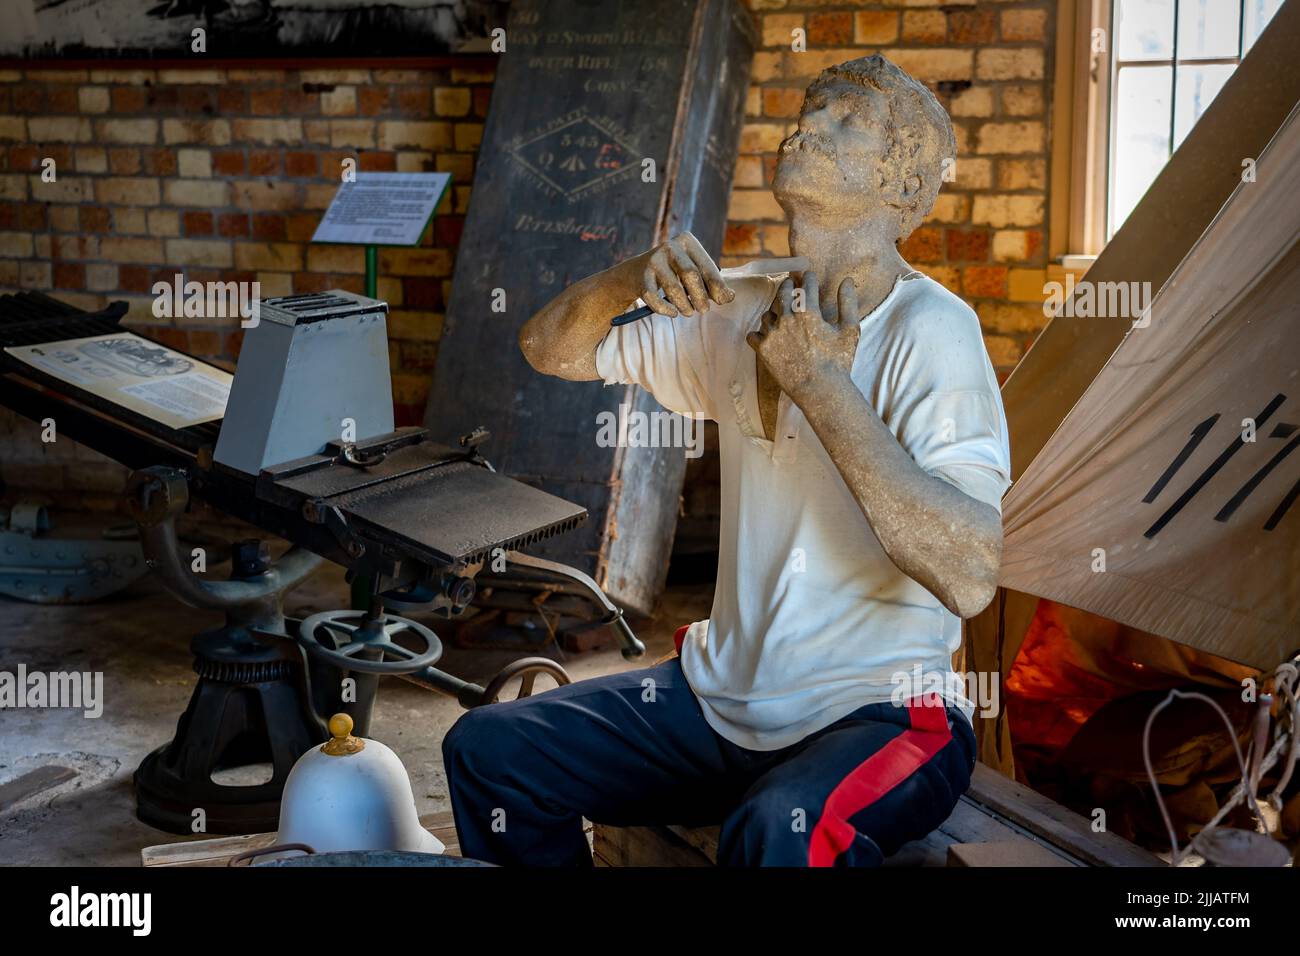 Brisbane, Australia - Sculpture of a man shaving with a razor blade at the Fort Lytton museum Stock Photo